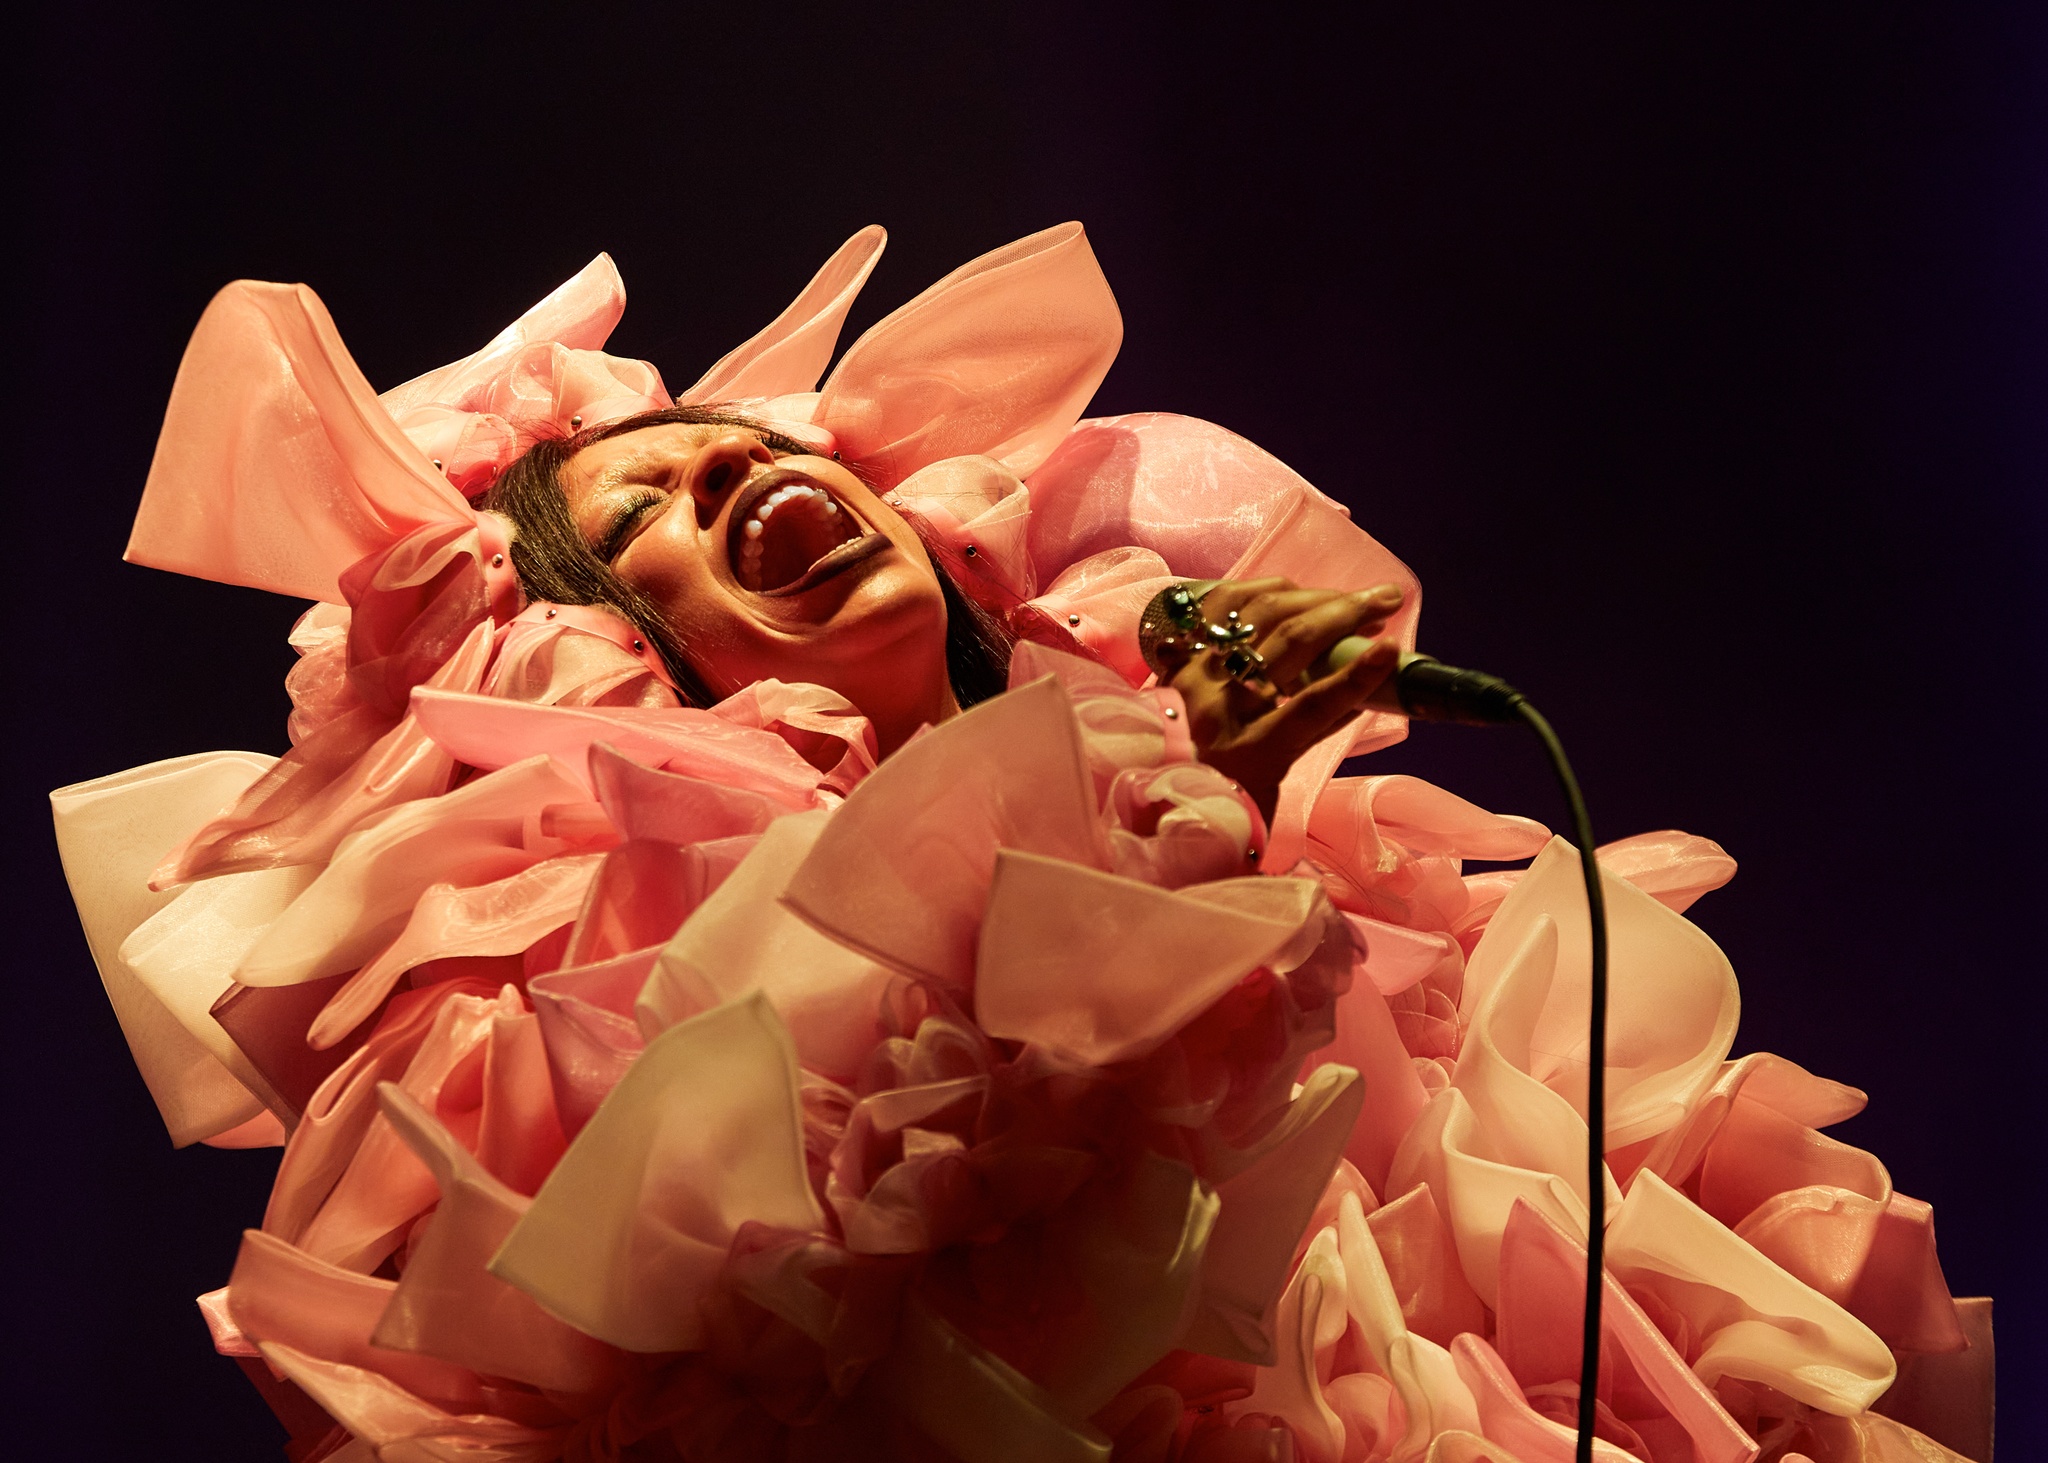 A close-up of a singer performing with their head thrown back, eyes closed, and mouth open into a microphone. The singer is a Black person who wears a puffy, frilly pink dress with a head covering.